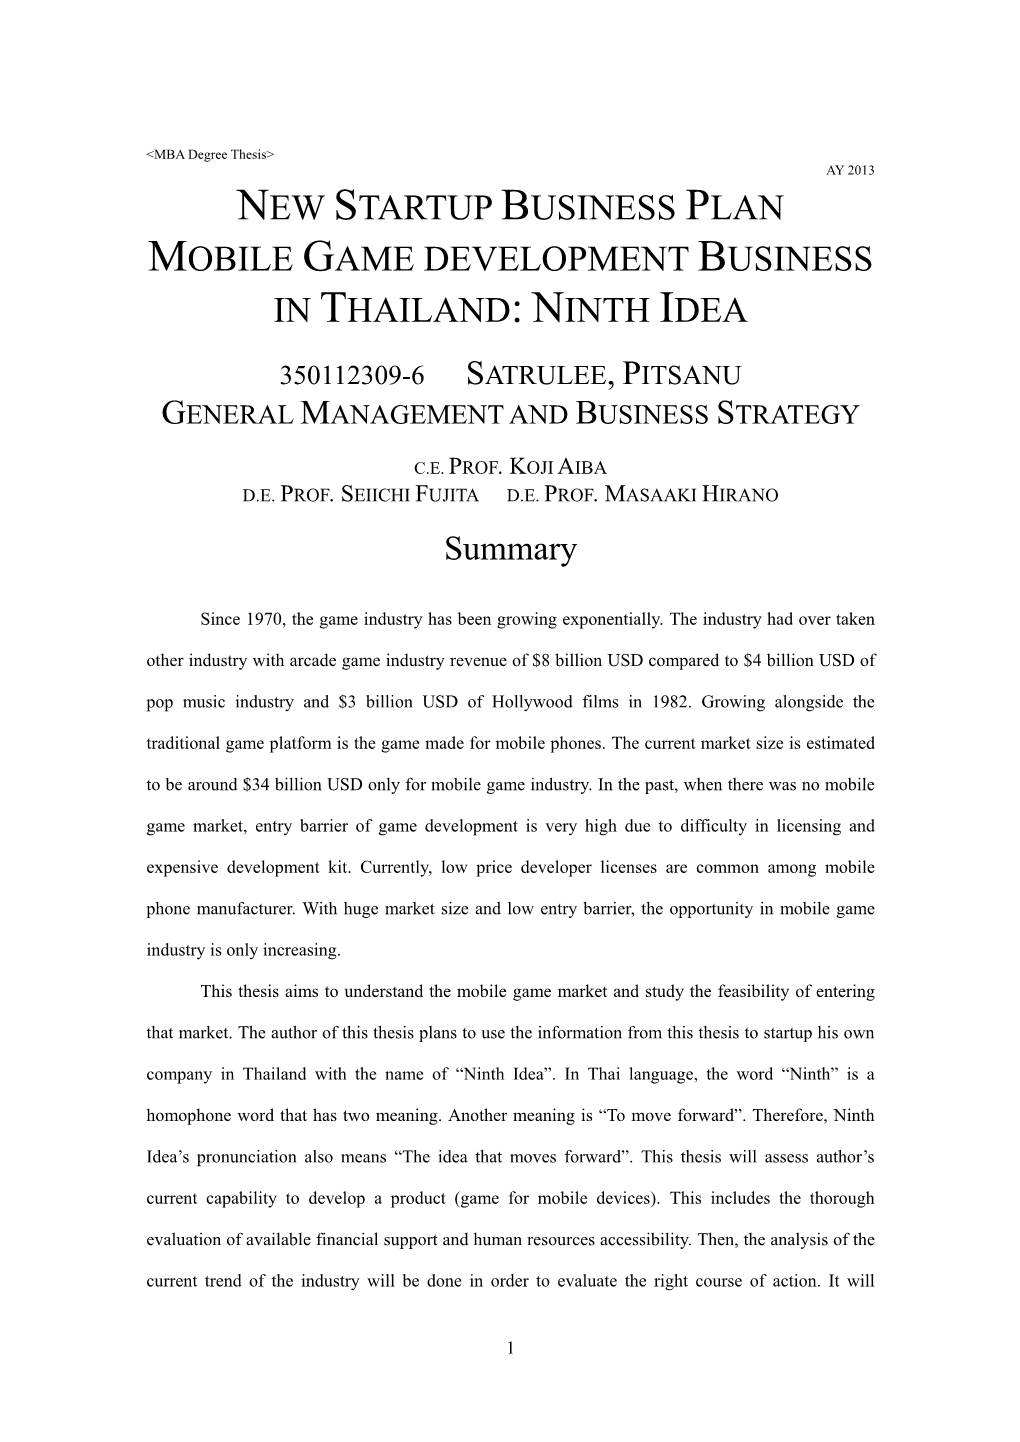 New Startup Business Plan Mobile Game Development Business in Thailand: Ninth Idea